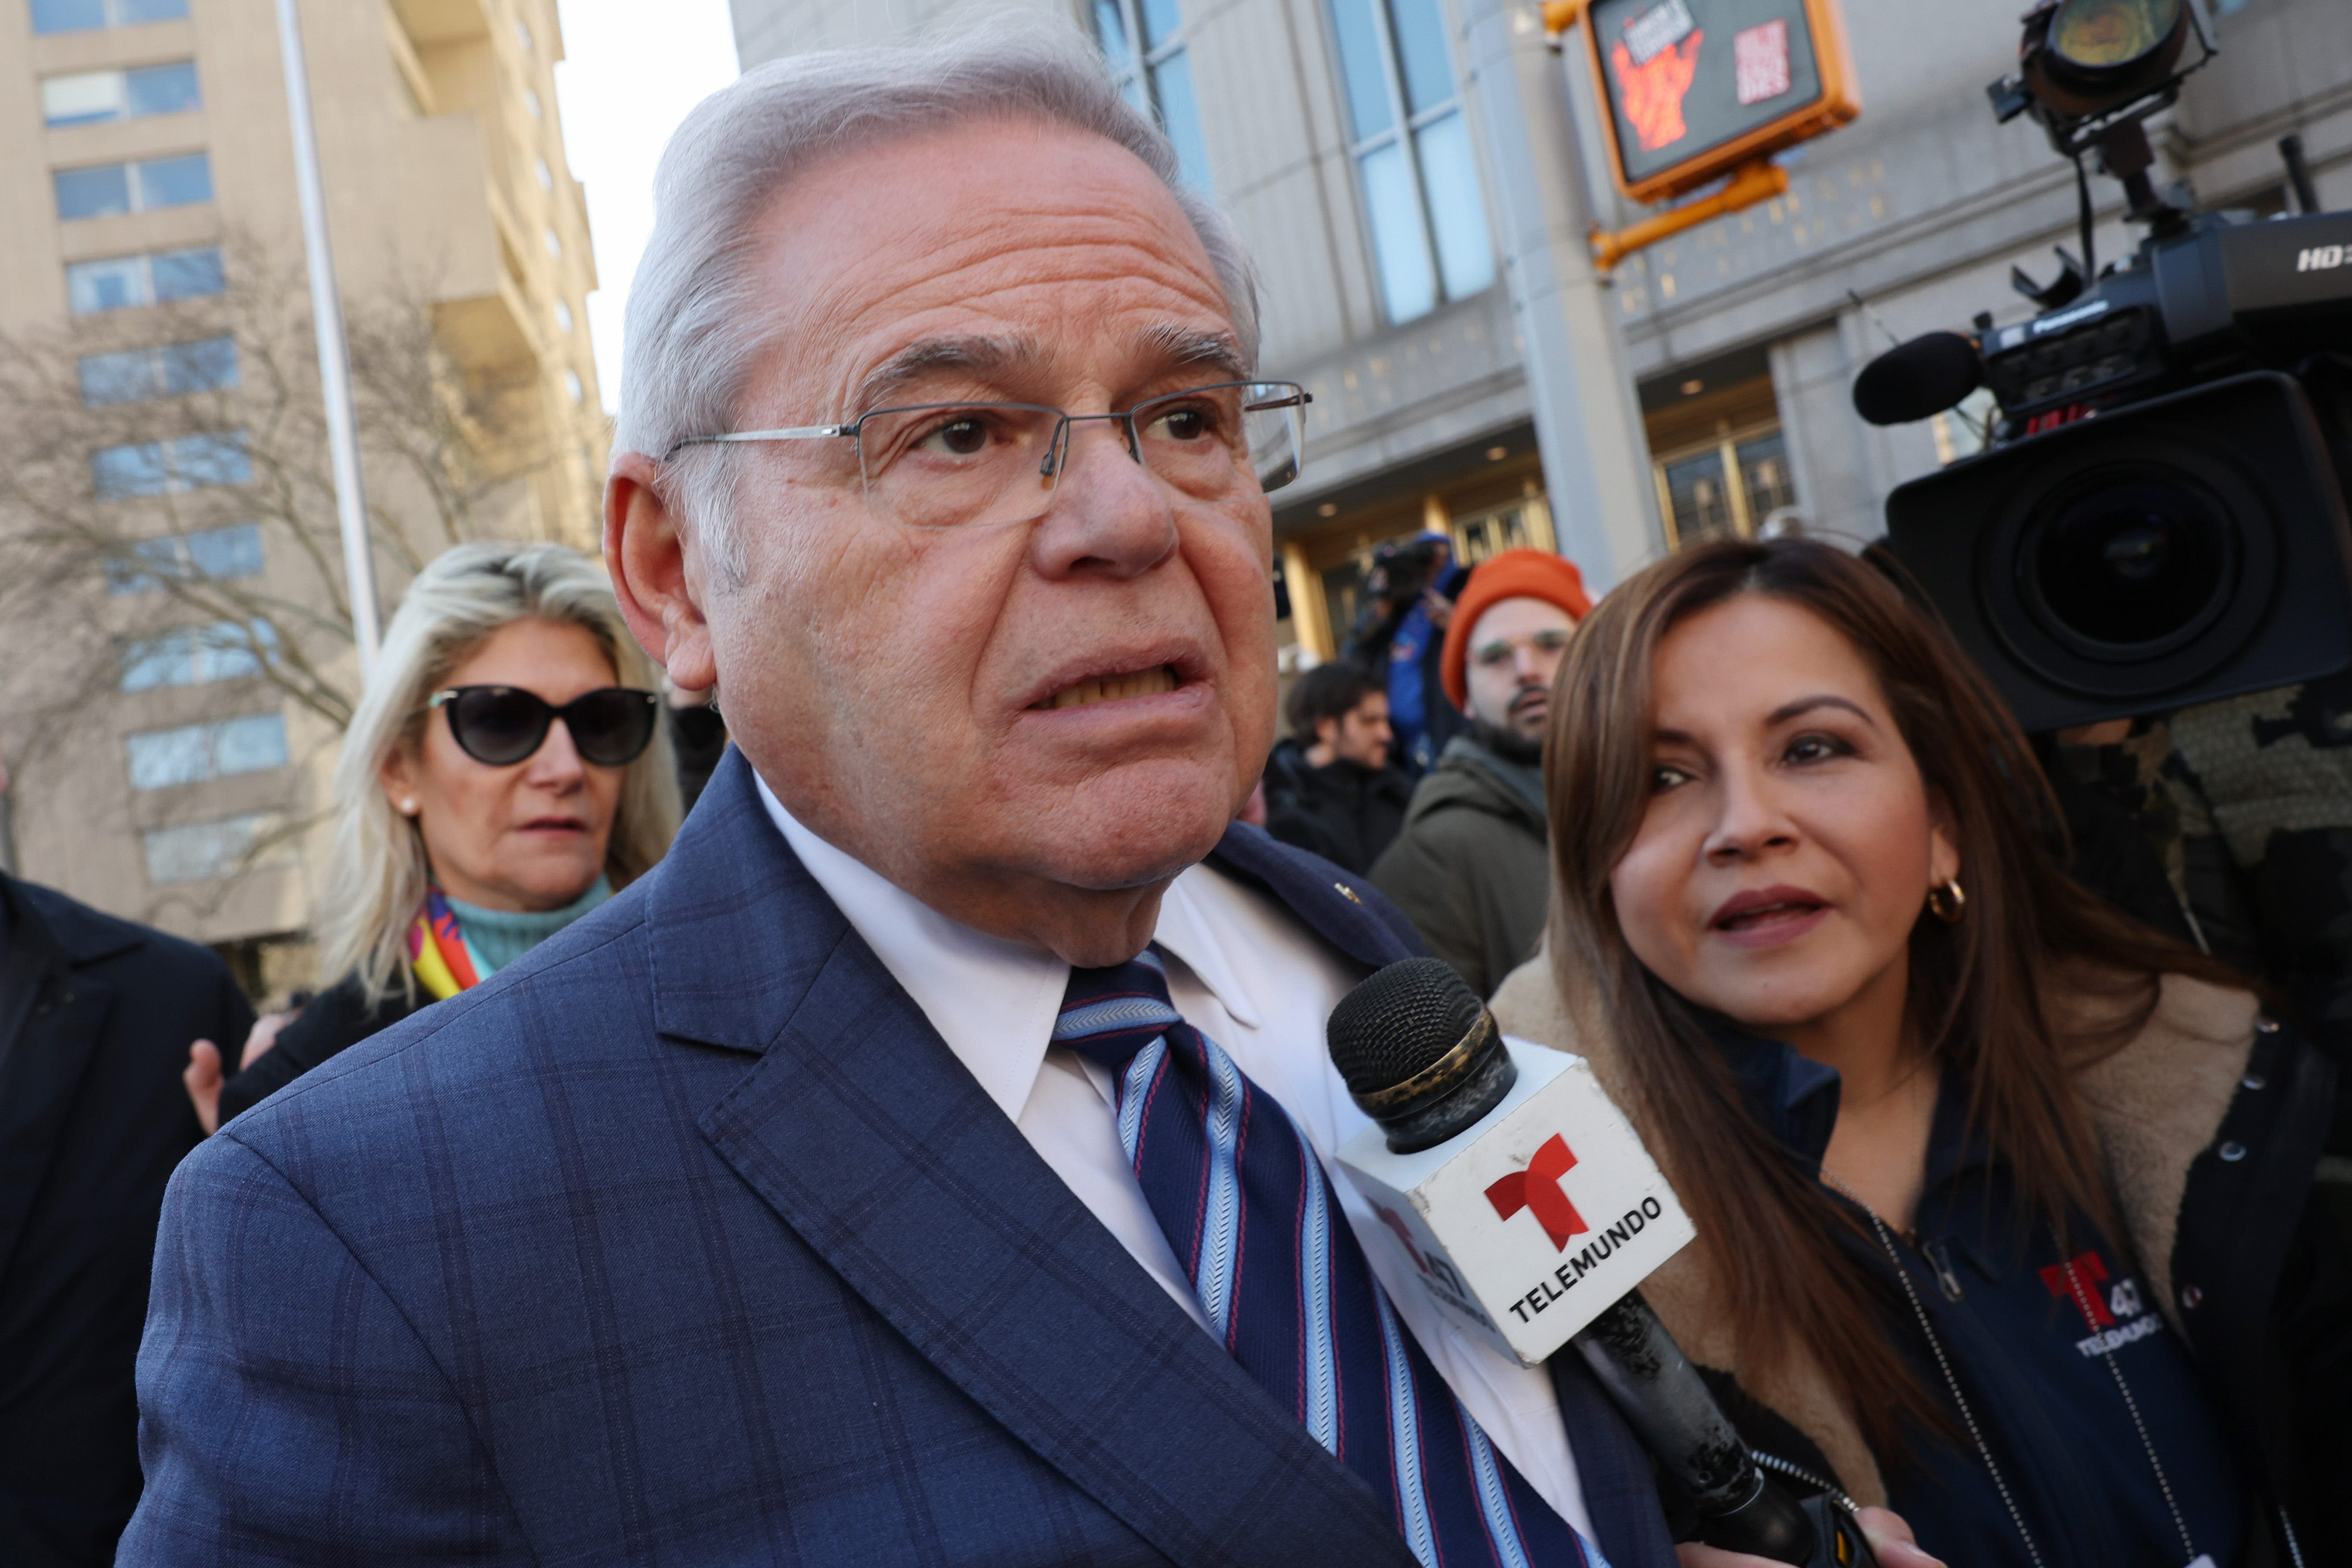 New Jersey Sen. Bob Menendez convicted on all counts at sweeping corruption trial